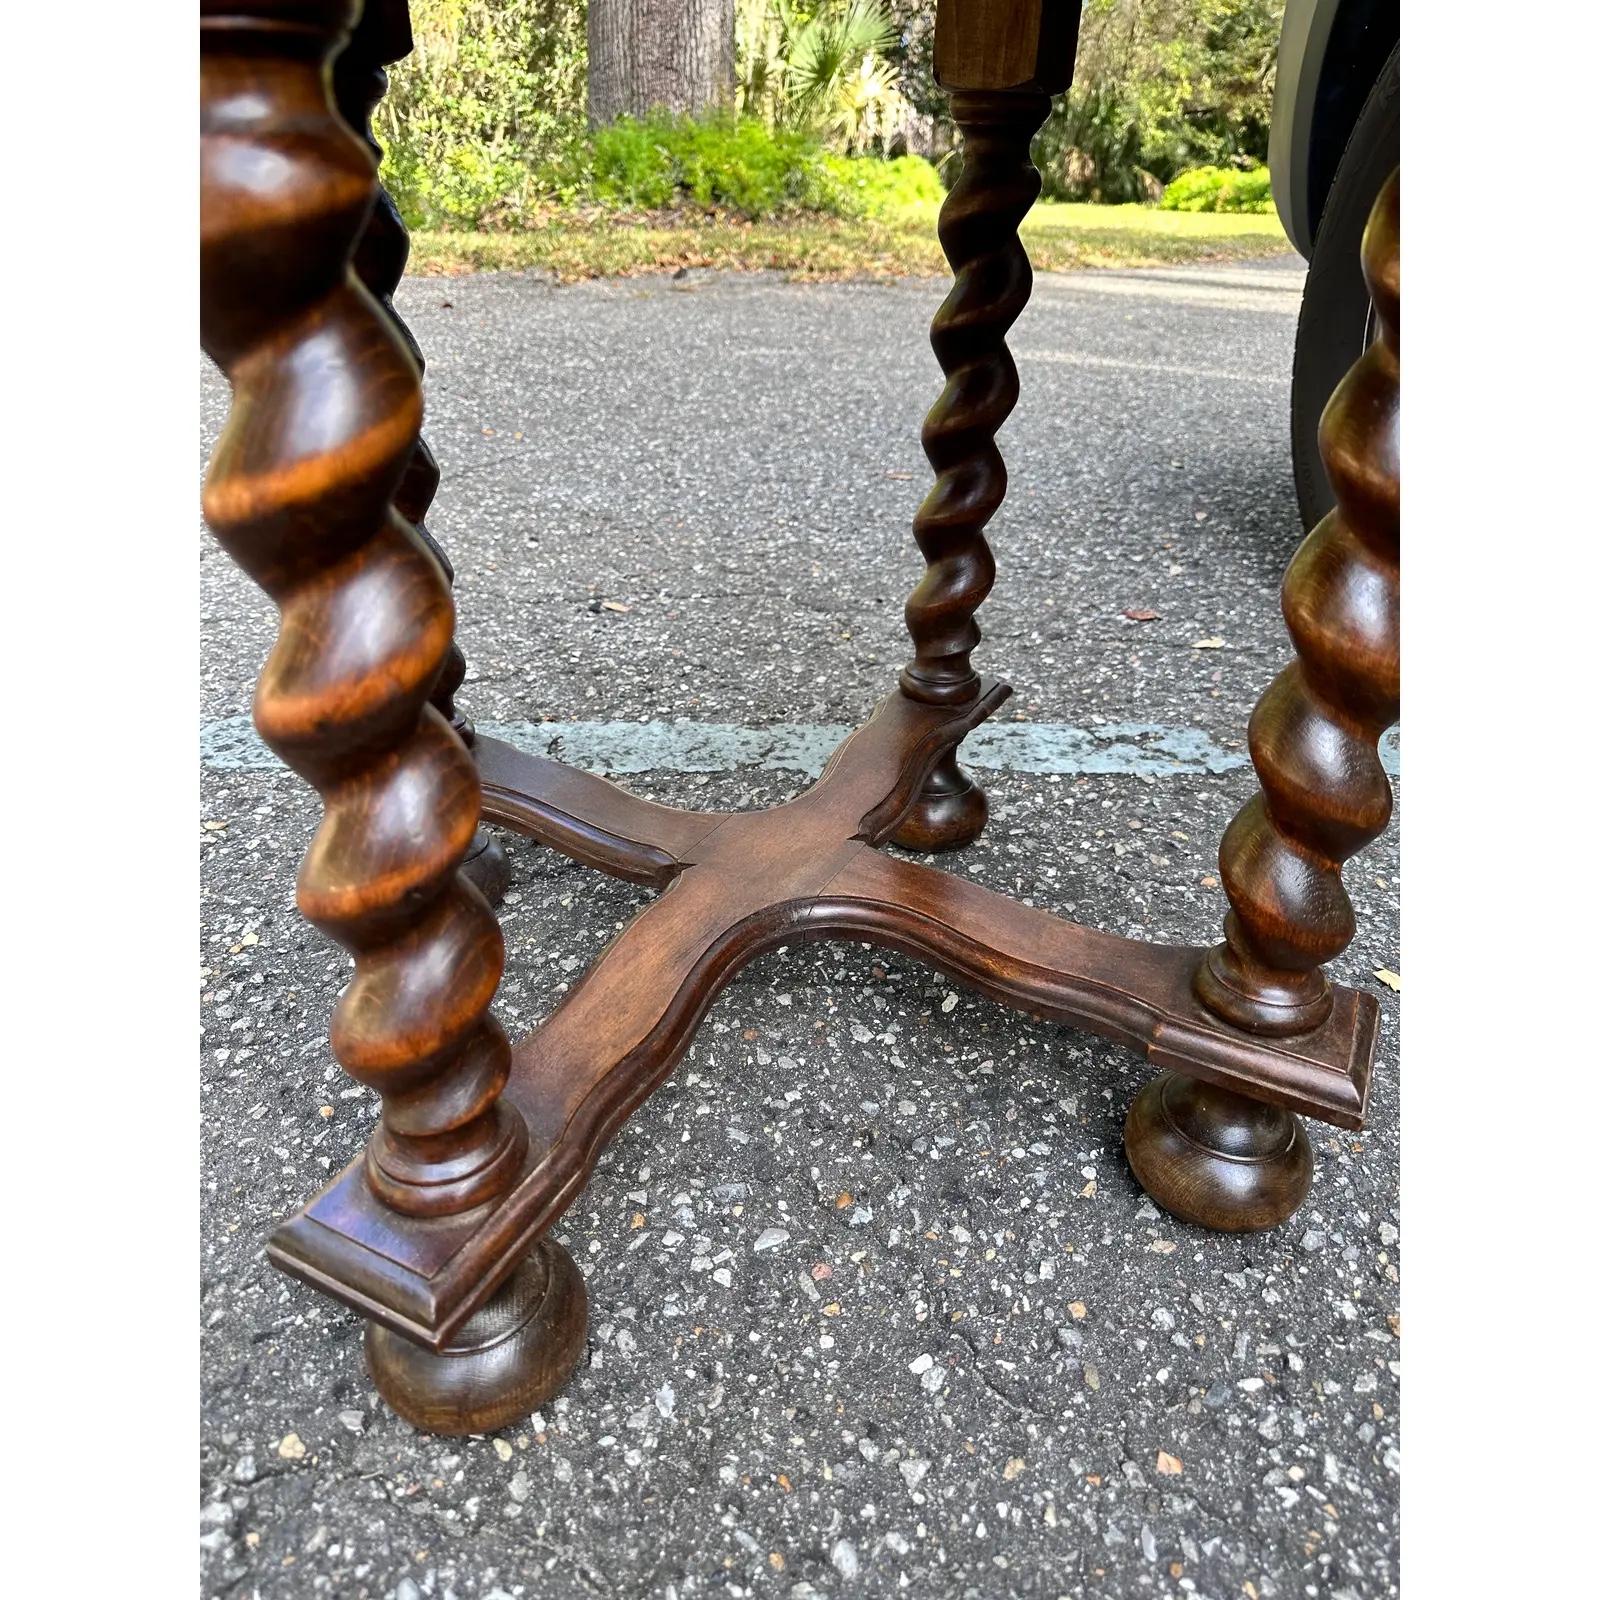 This is a beautiful 19th century English side table! This piece follows the barley twist style but with a unique flare. This table is much chunkier than the typical barley twist pieces with thick legs and large feet at the base the stretcher. This